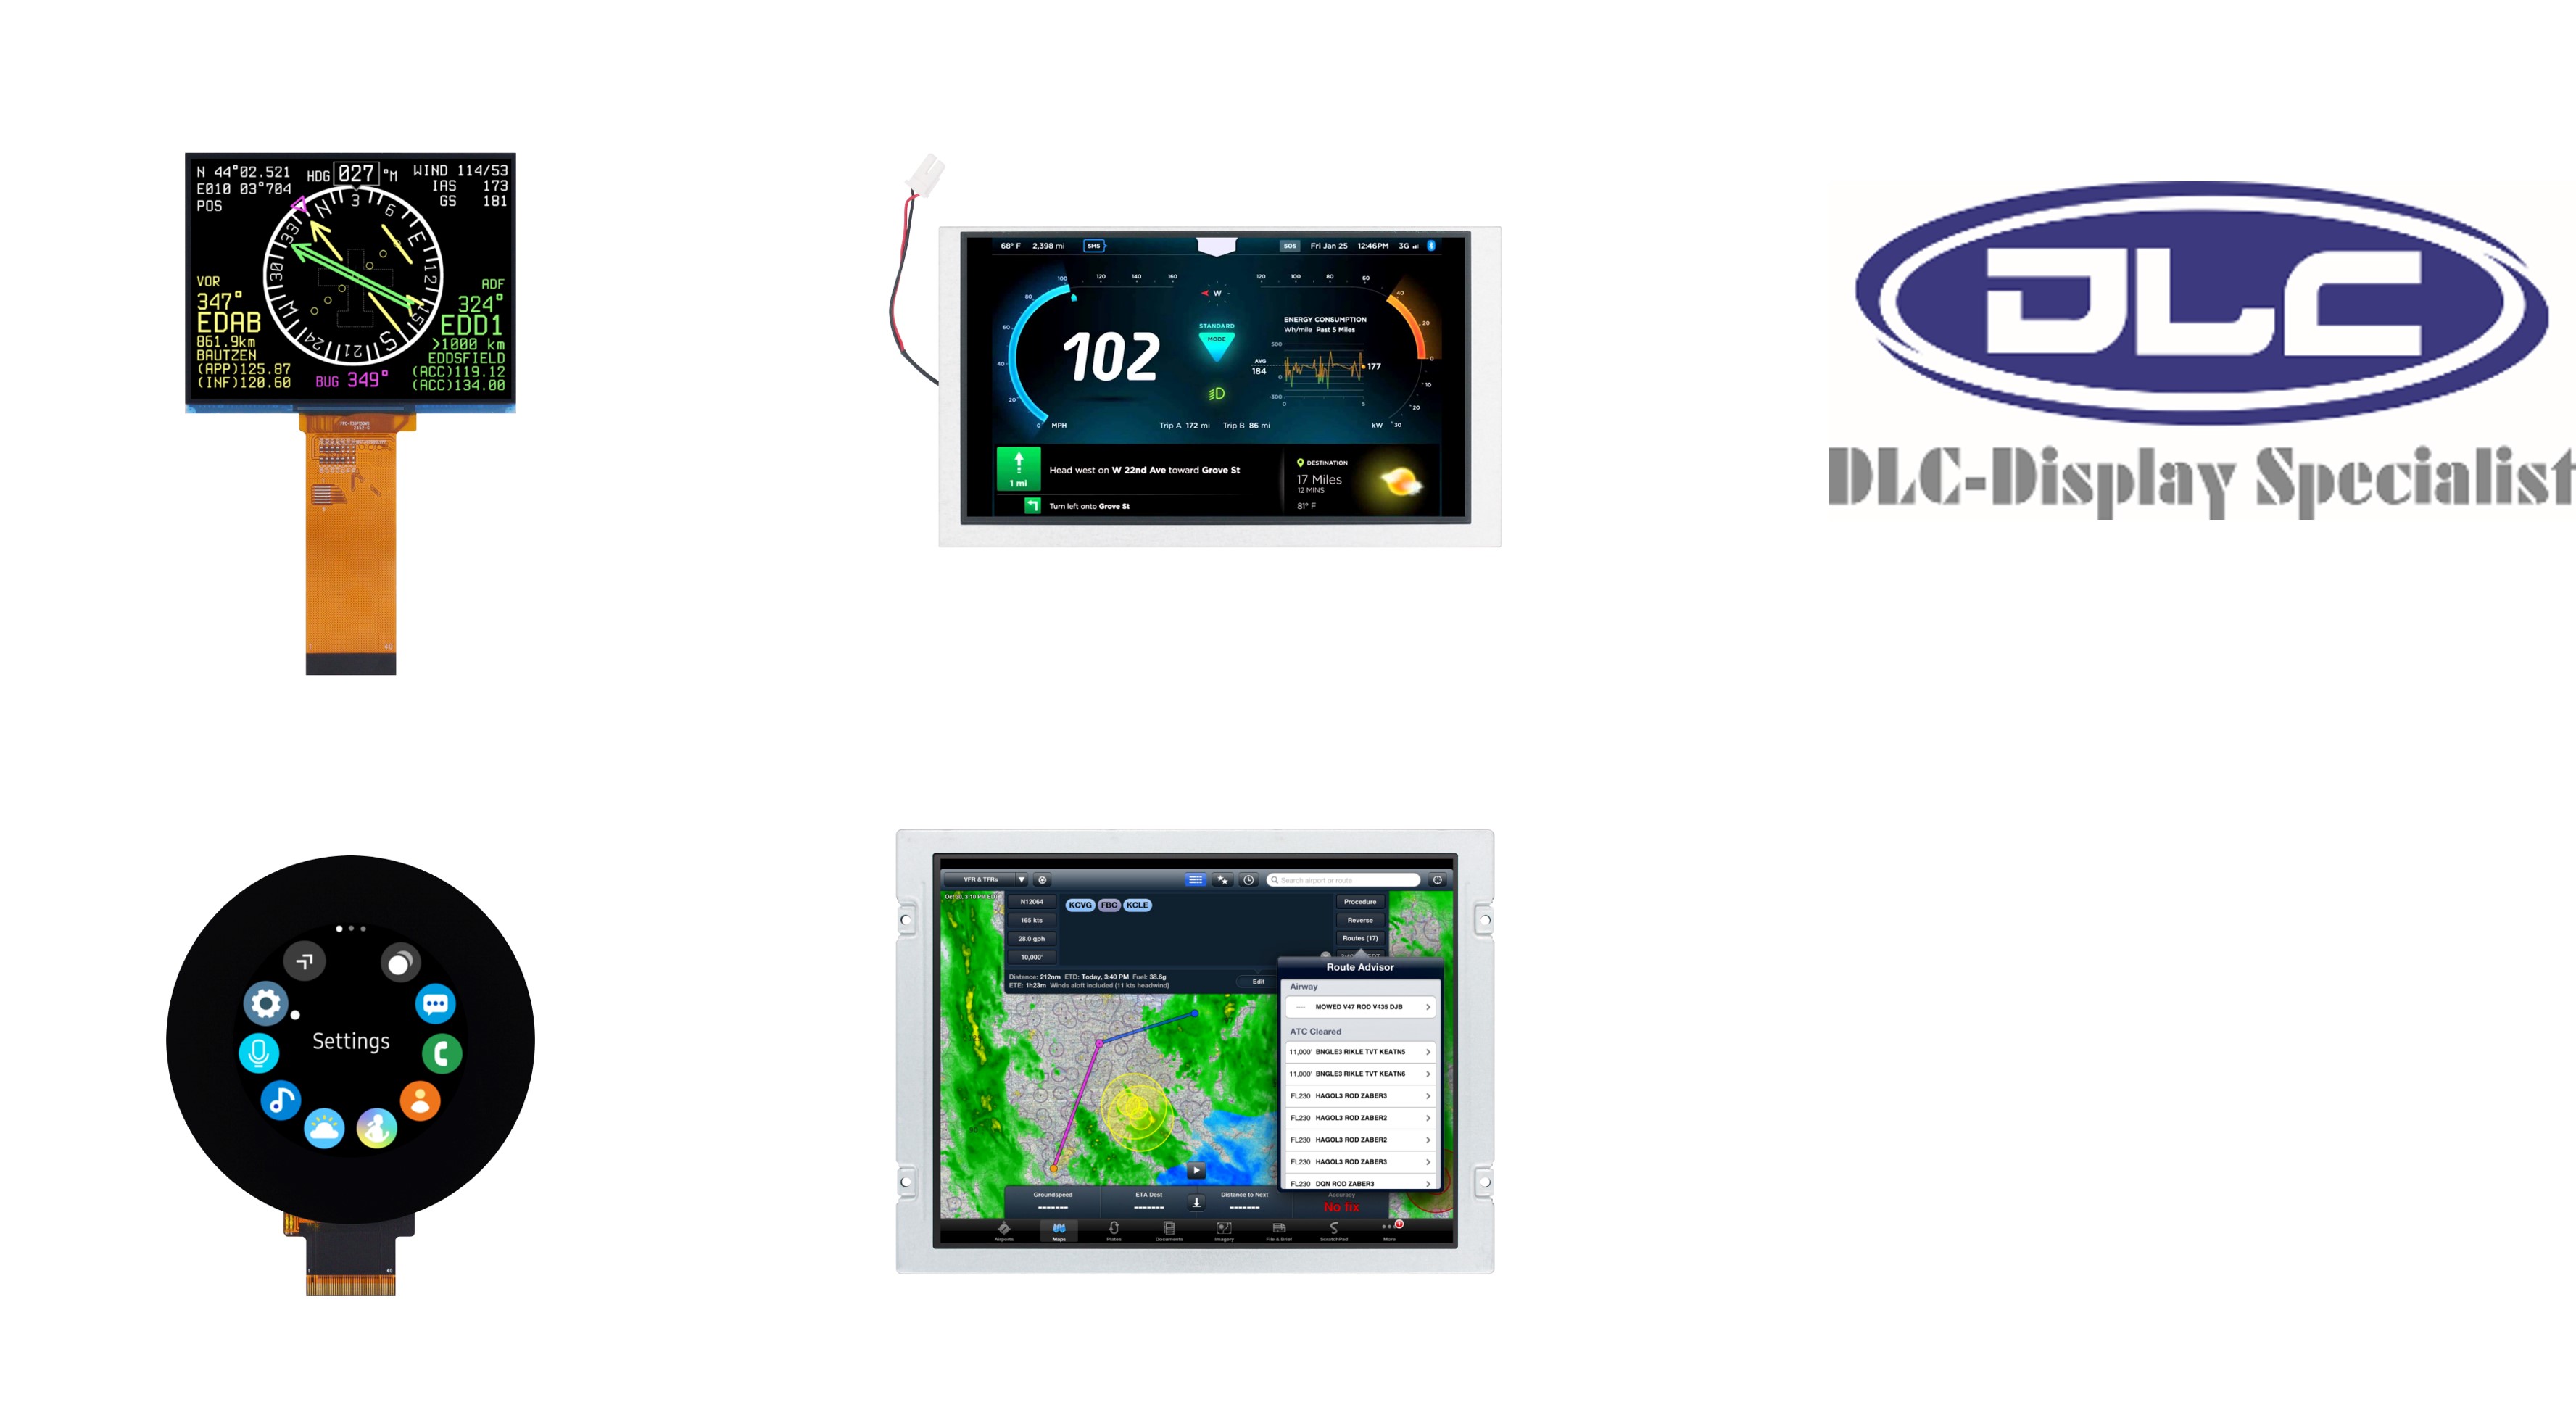 DLC adds 4 new displays for Home Automation, White goods and Outdoor Applications